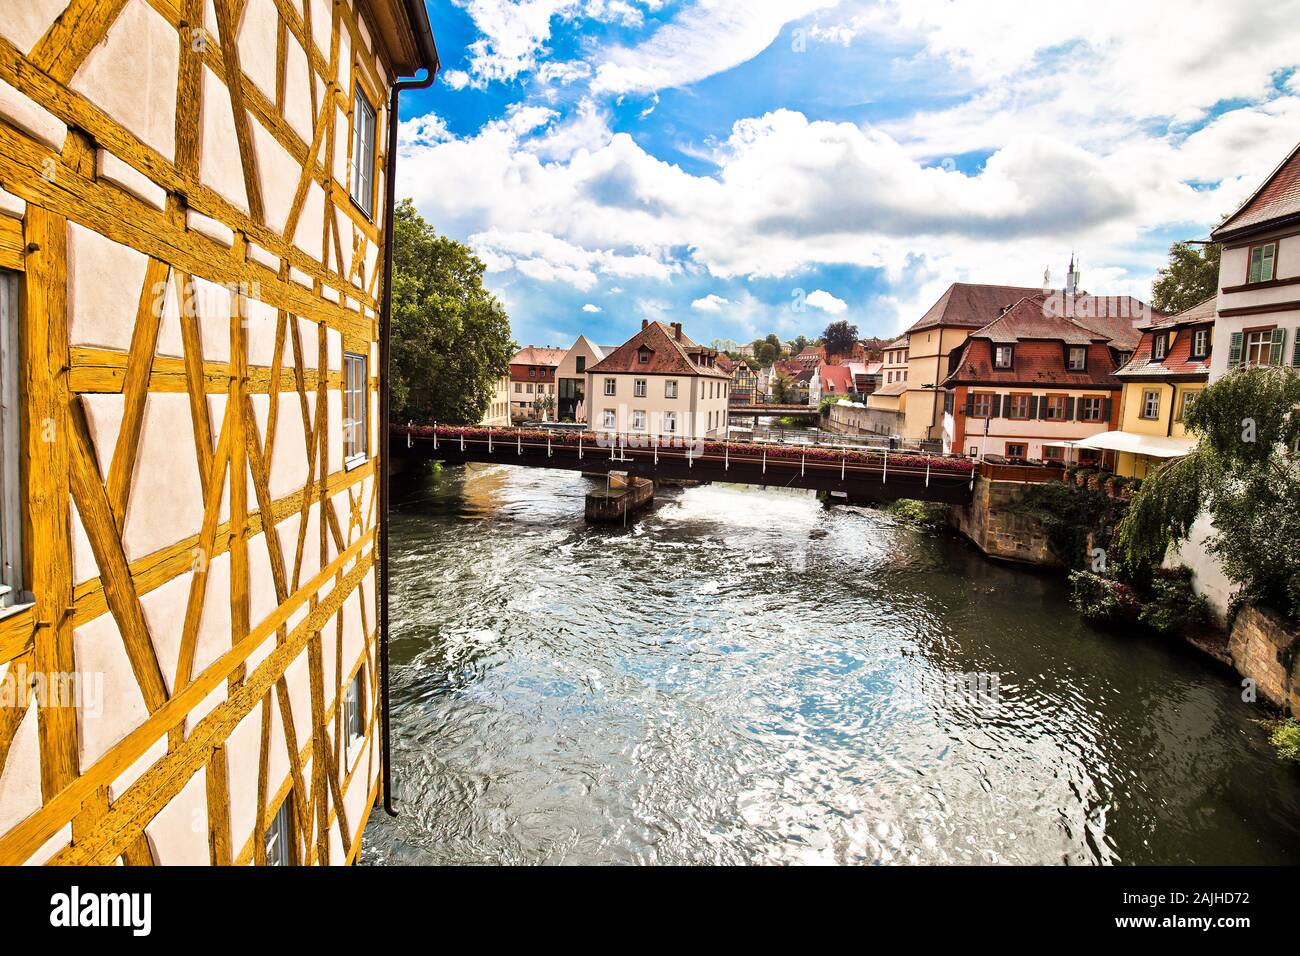 Bamberg. Scenic view of Old Town Hall of Bamberg (Altes Rathaus) with bridges over the Regnitz river, Upper Franconia, Bavaria region of Germany Stock Photo